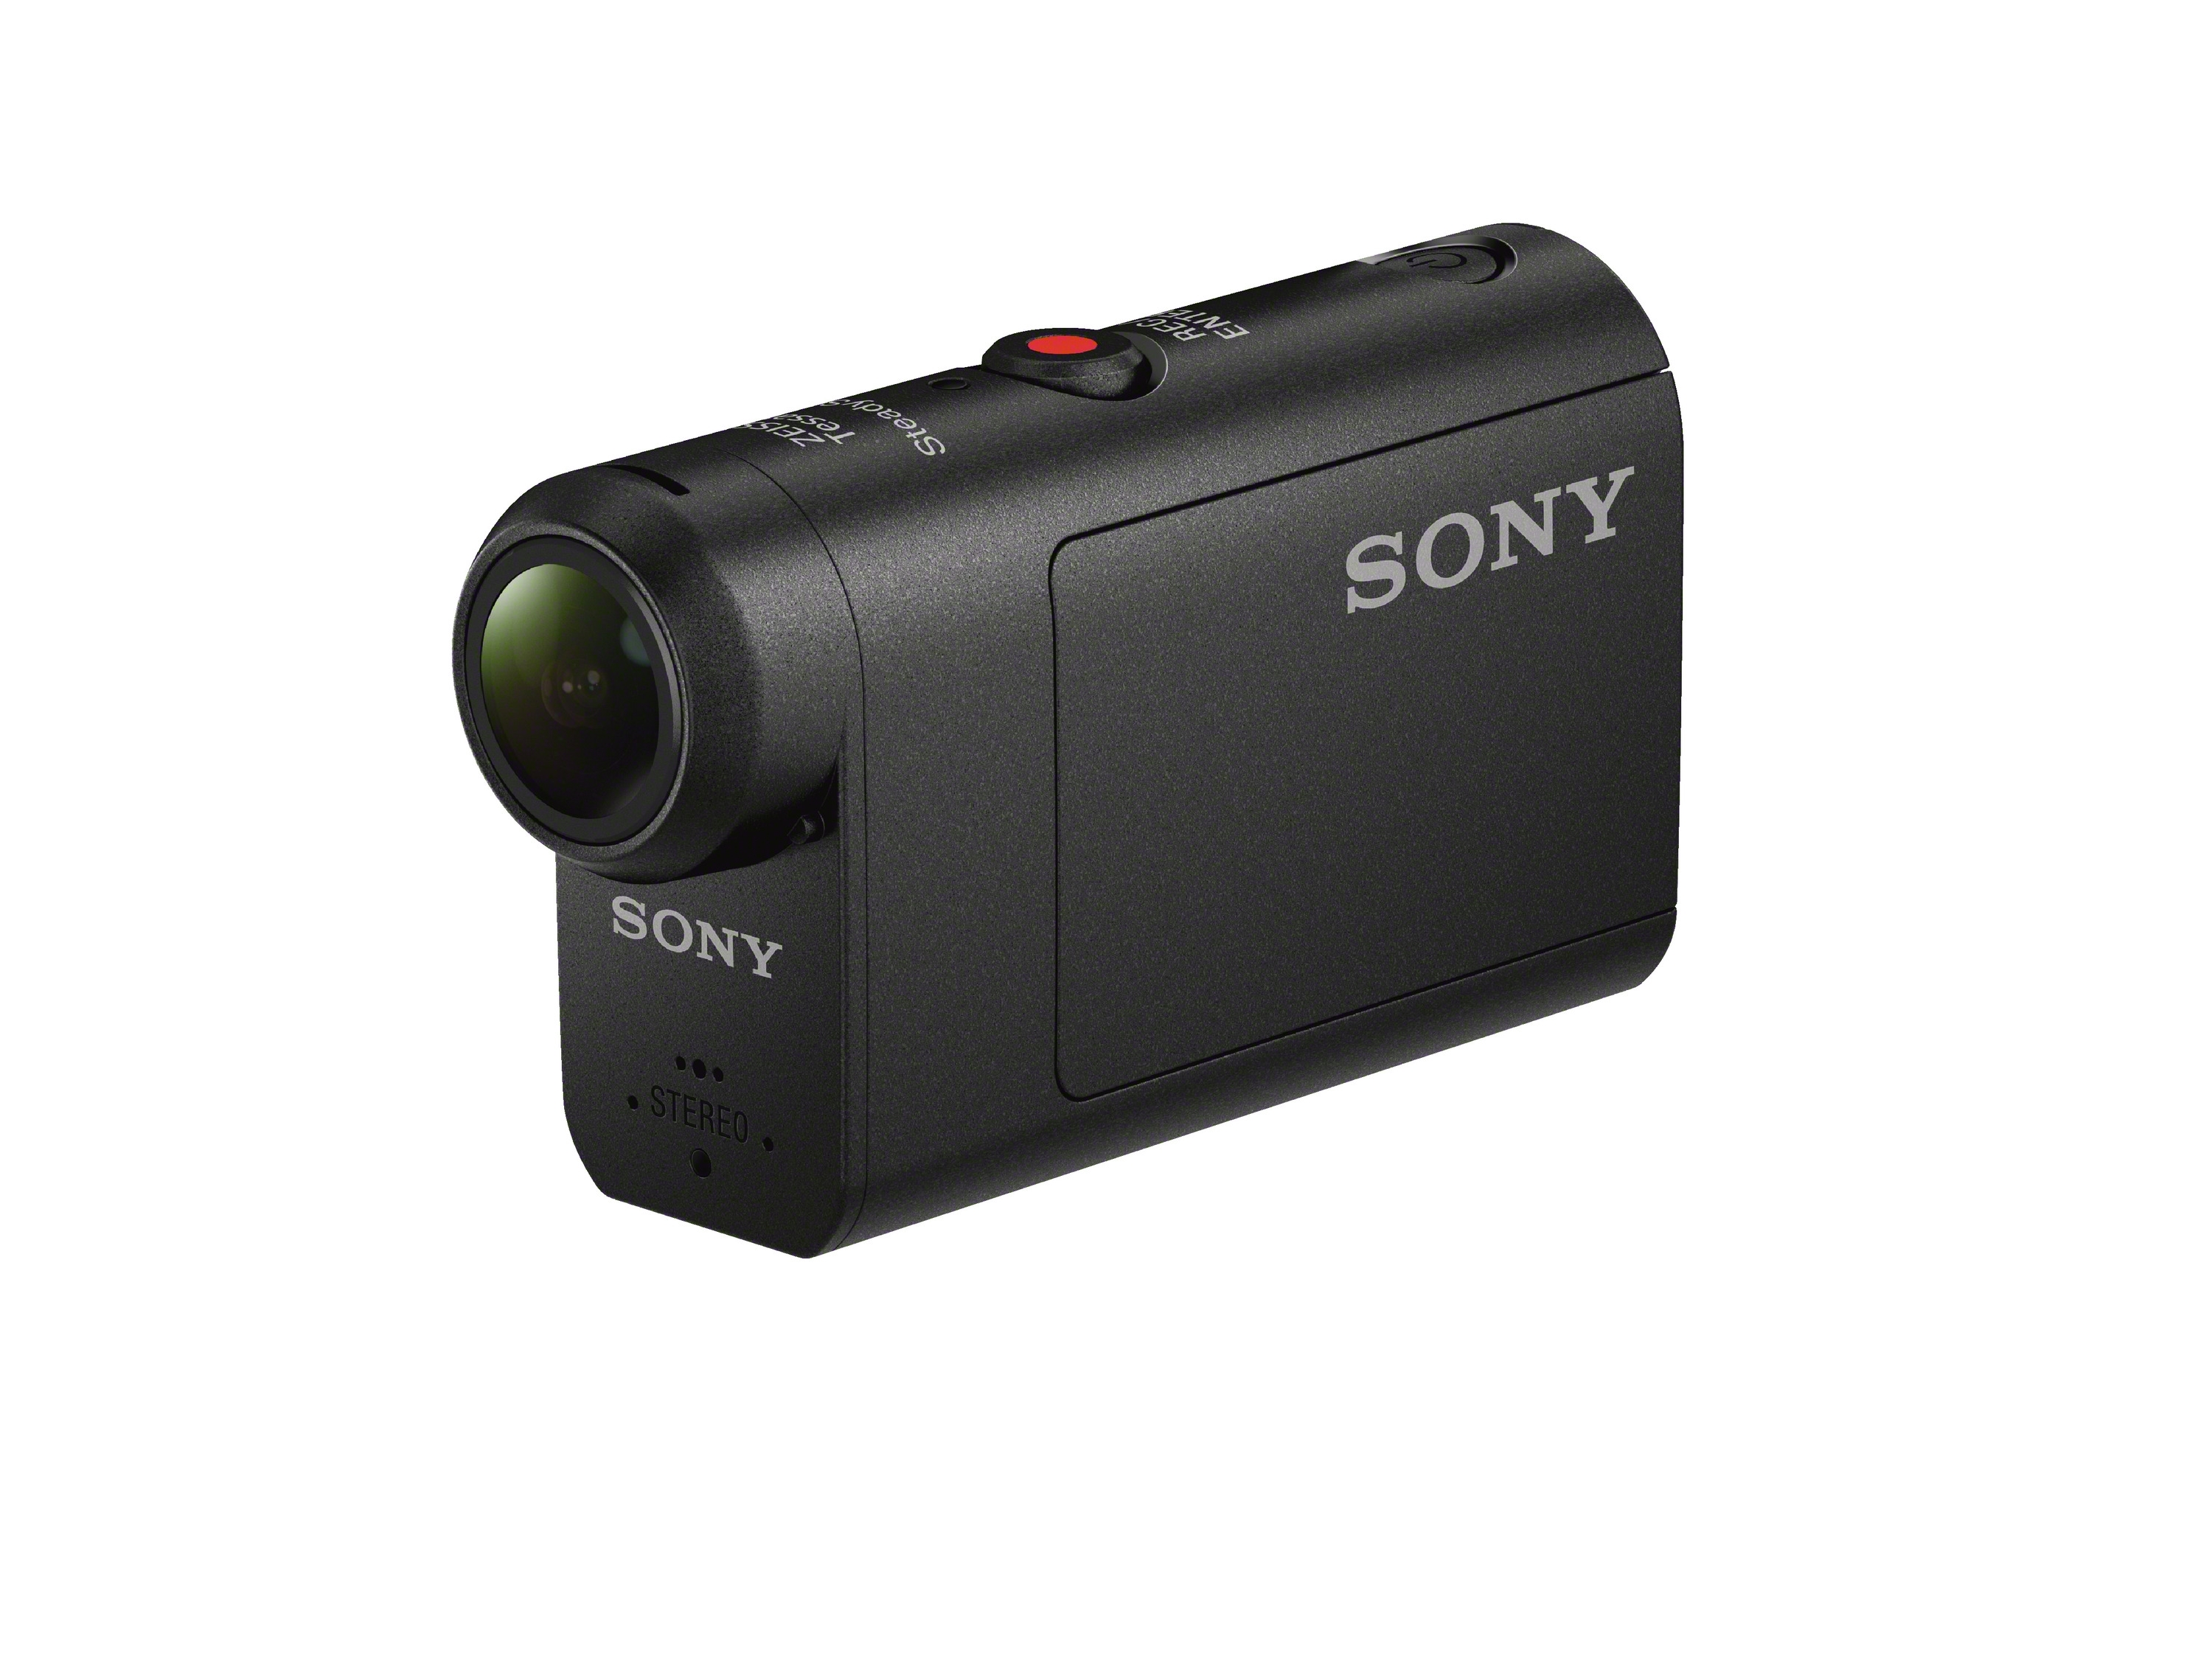 SONY HDR-AS50 Zeiss WLAN Cam Action 